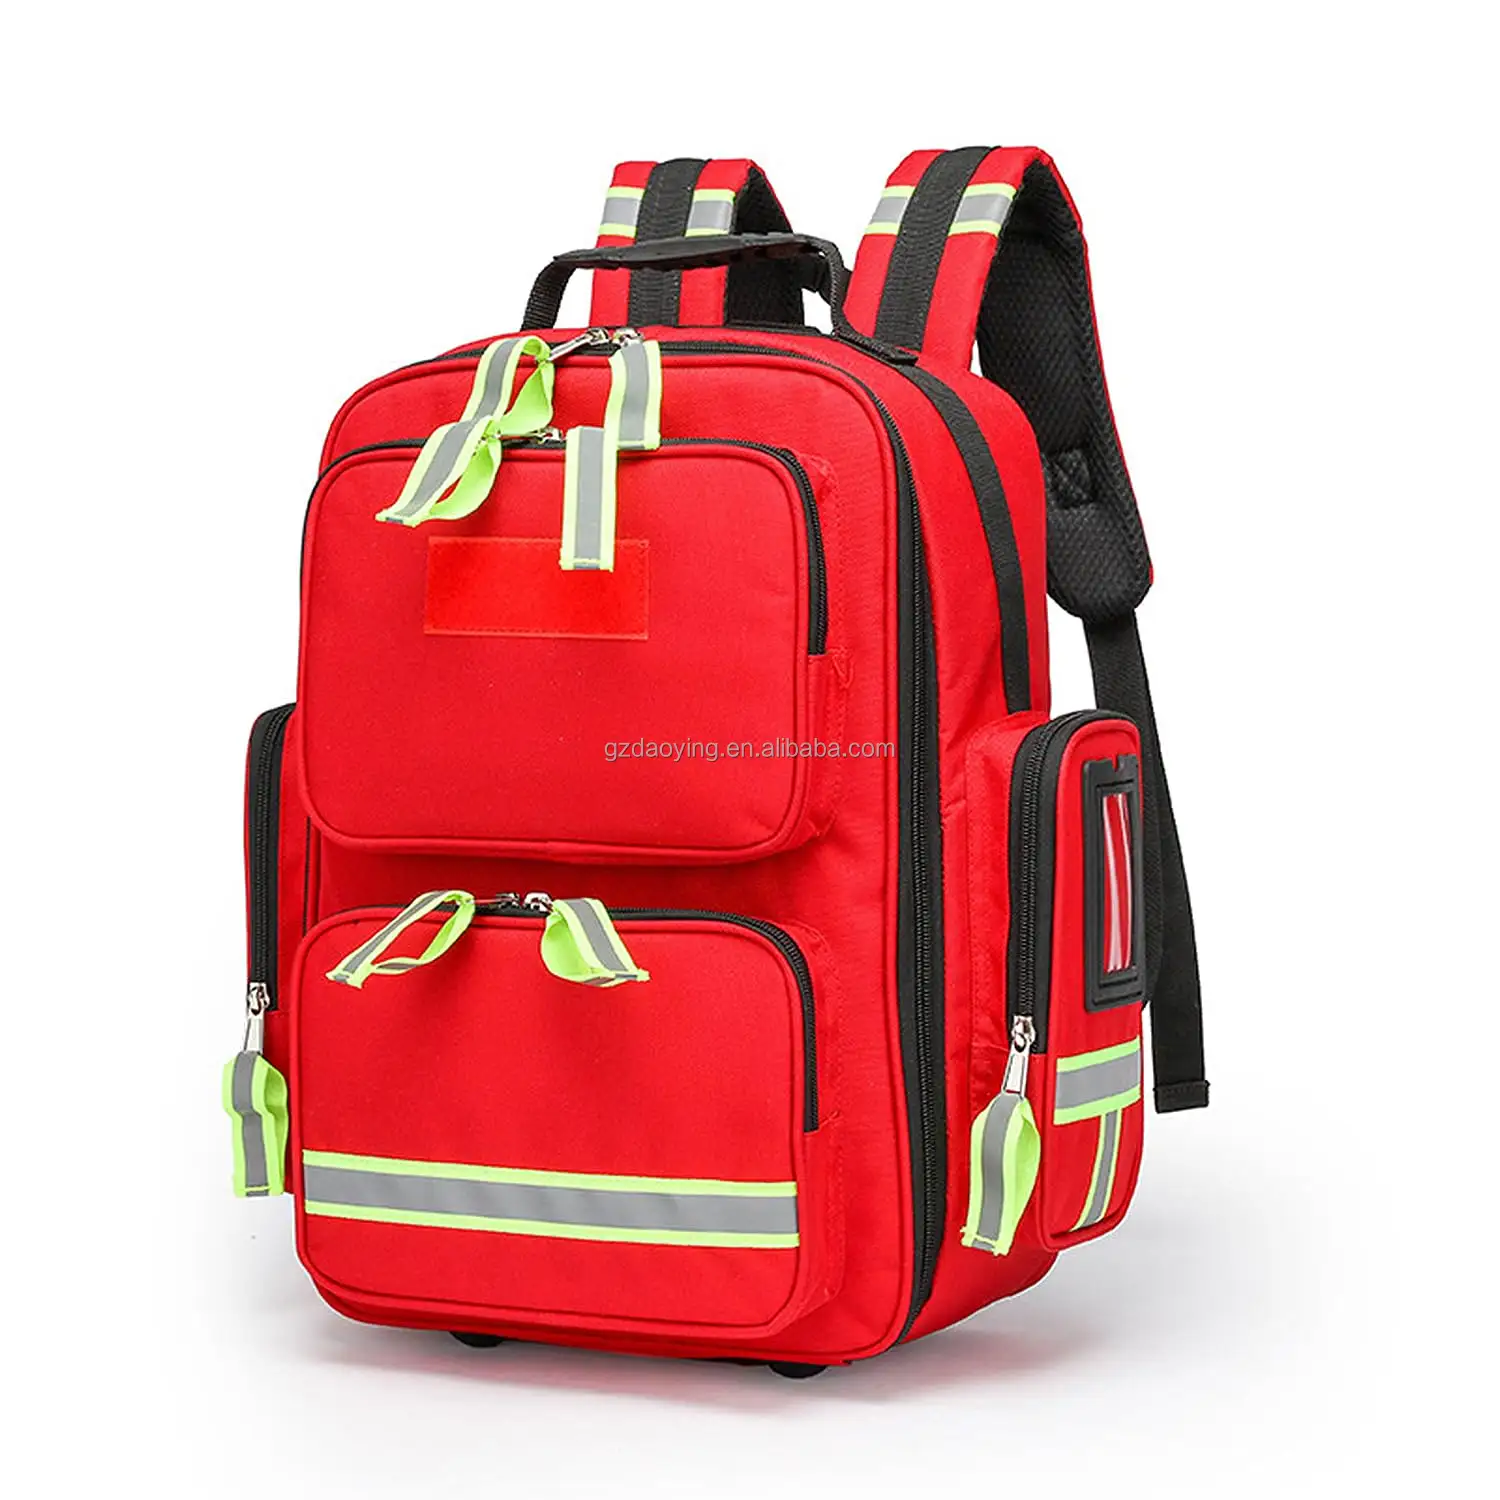 OEM Custom Medical Outdoor Travel rescue First Aid Kit Backpack First Responder Jump Hiking Emergency Trauma Bags